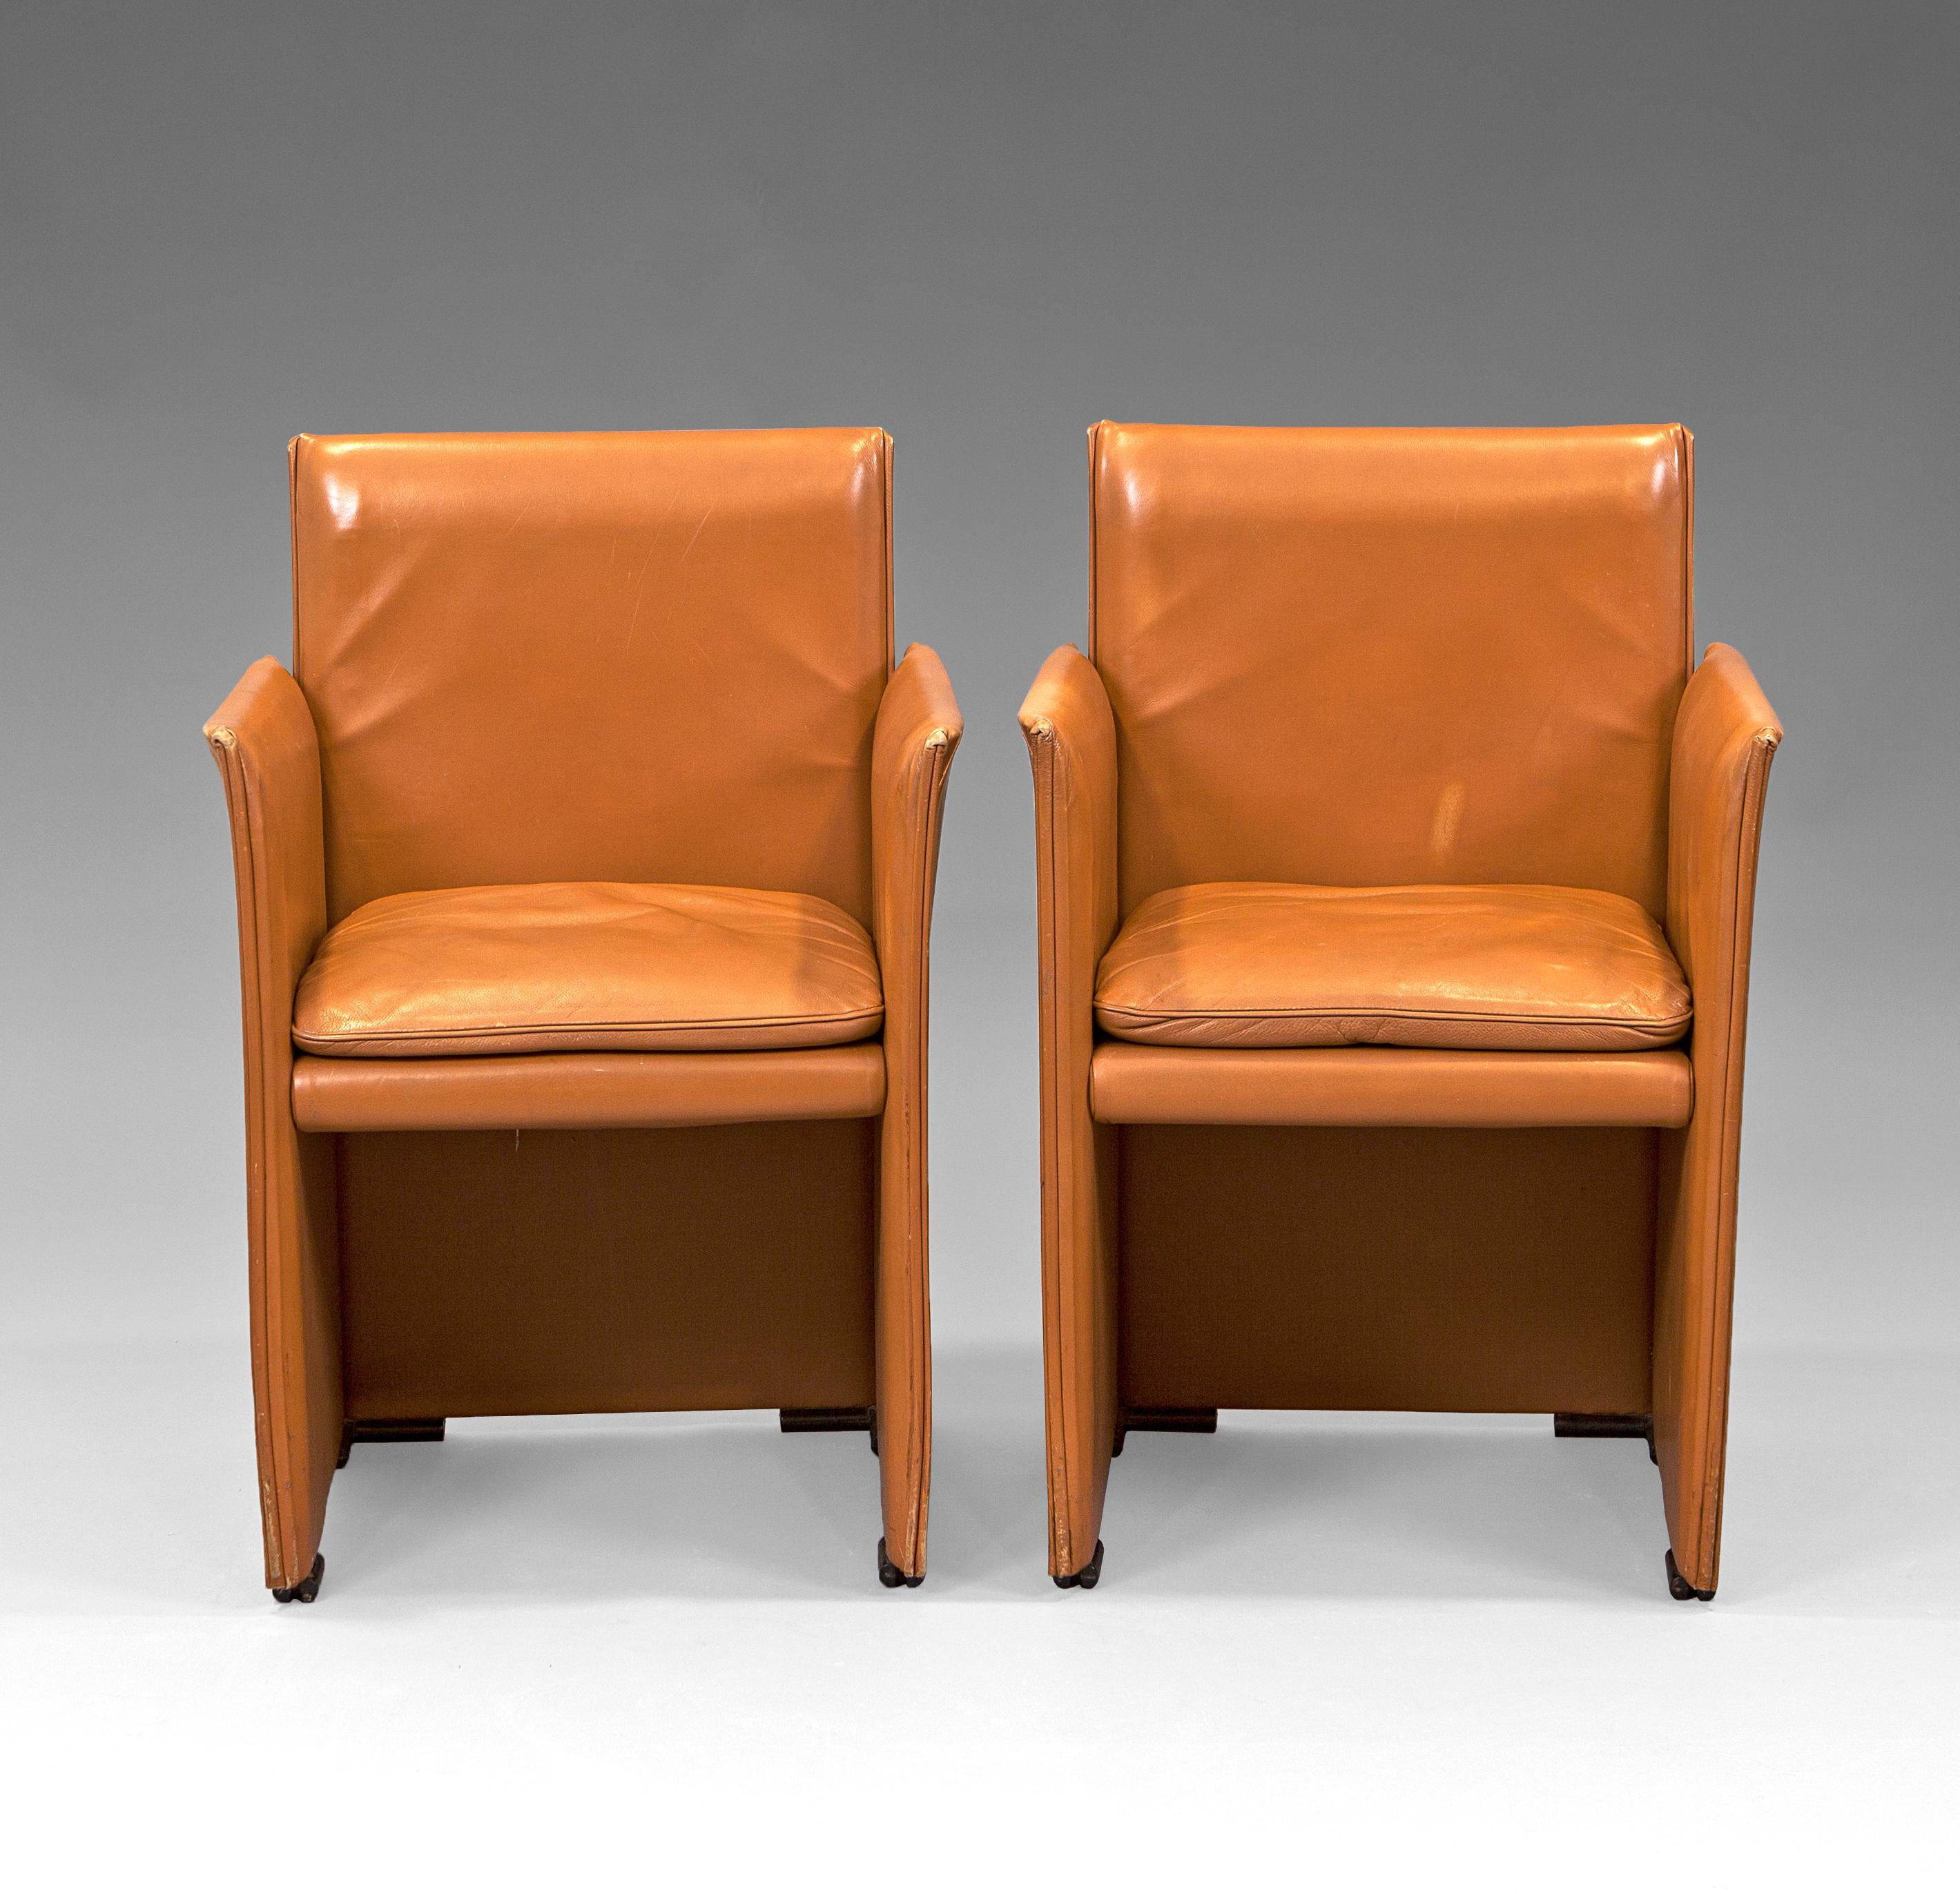 “401 Break” leather armchairs by Mario Bellini for Cassina. Rigid metallic structure covered in cognac leather. Italy, 1980s. This design is included in the 20th century design and architecture collection of the Metropolitan Museum of Art (MoMa).